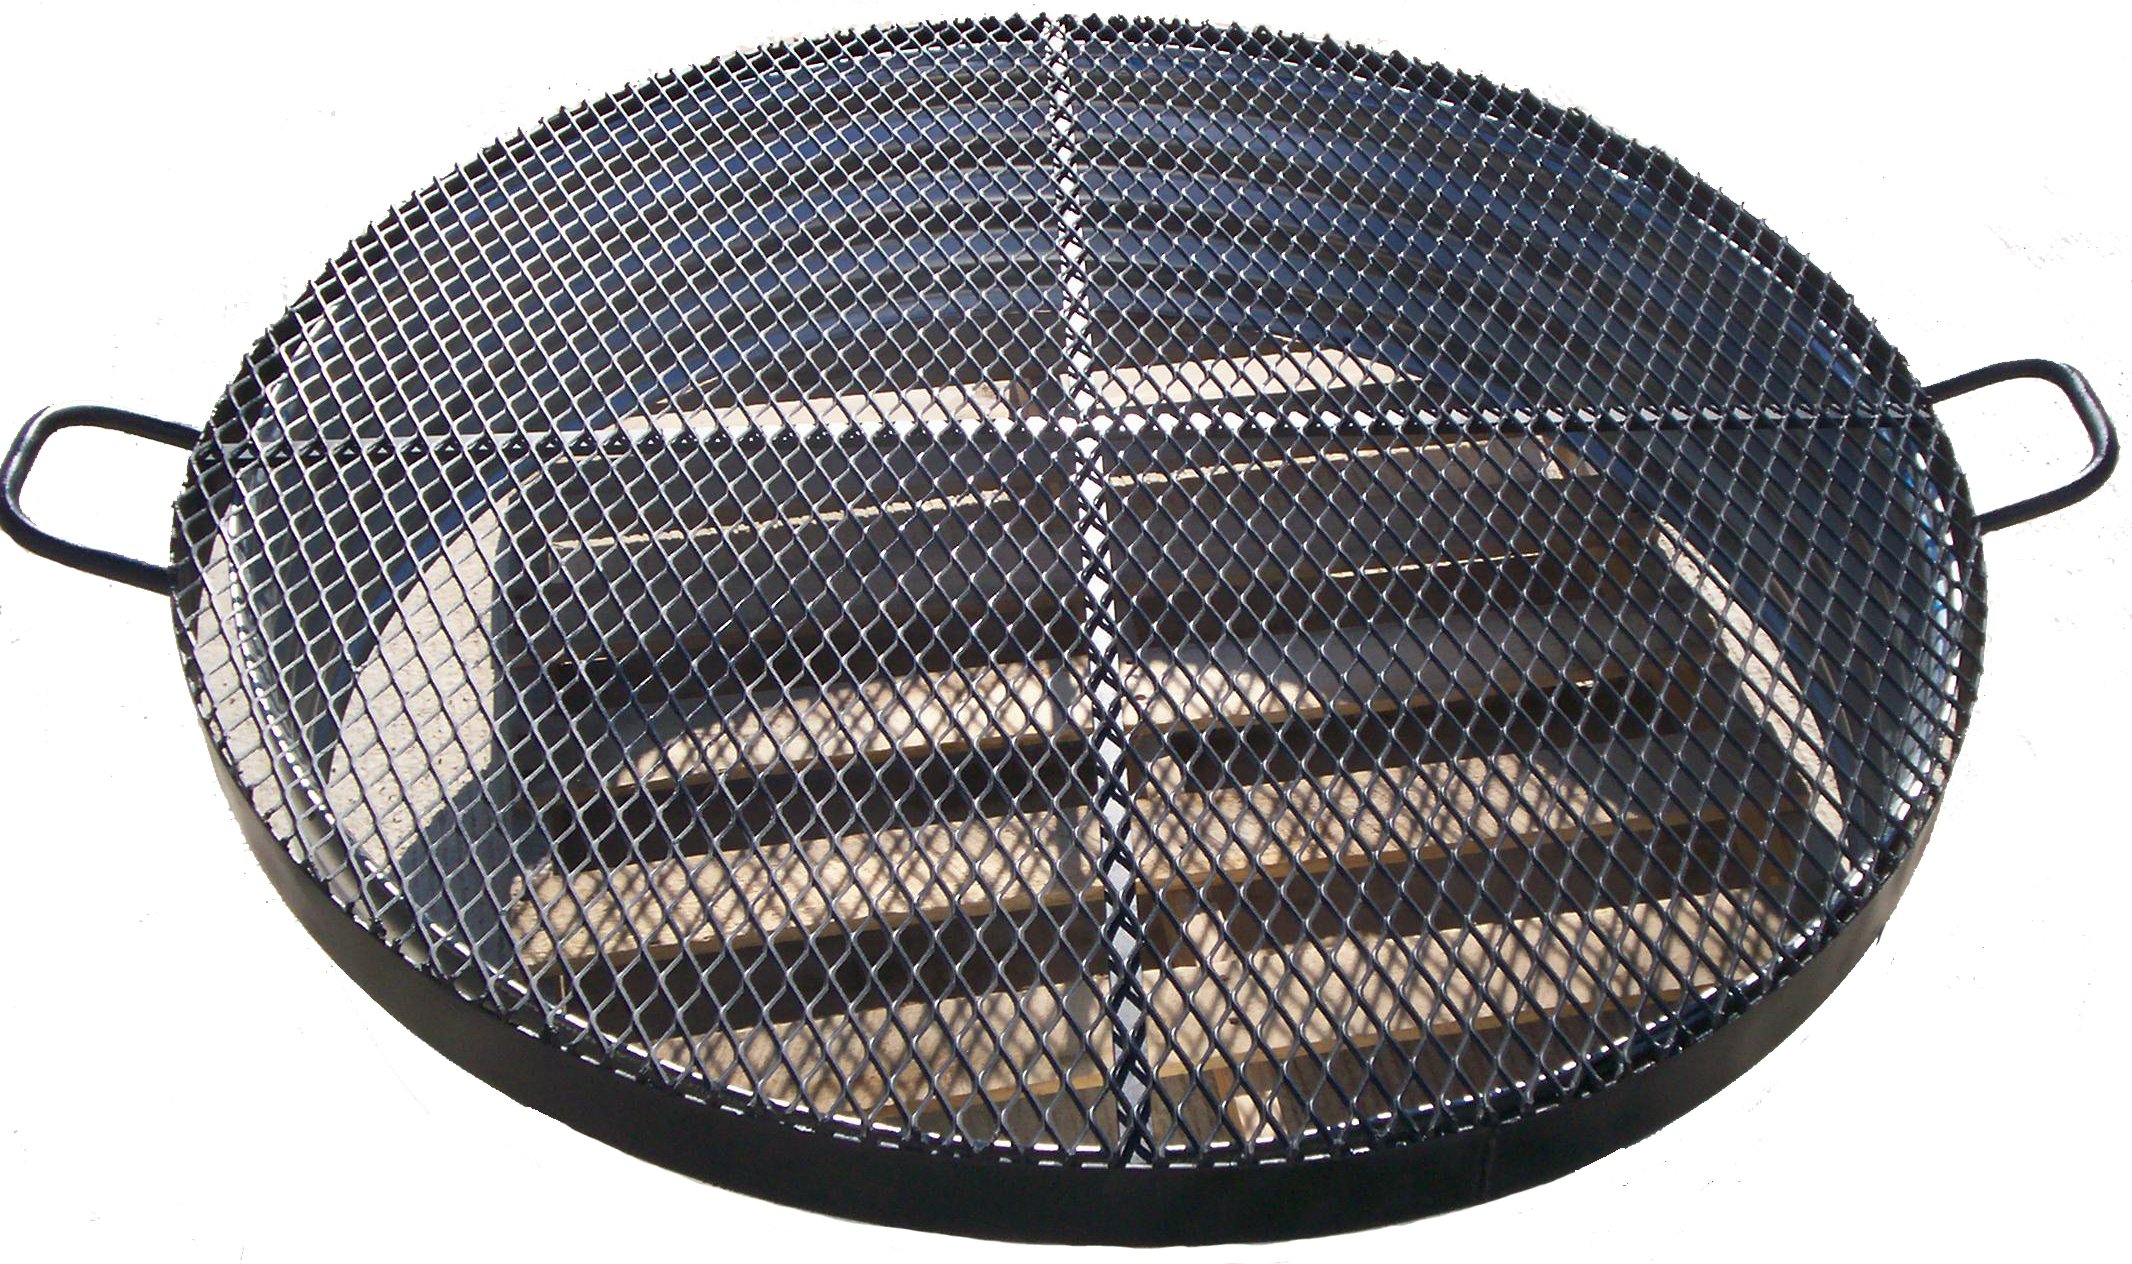 Fire Pit Grate Feedsforless Com, What Size Grate For Fire Pit